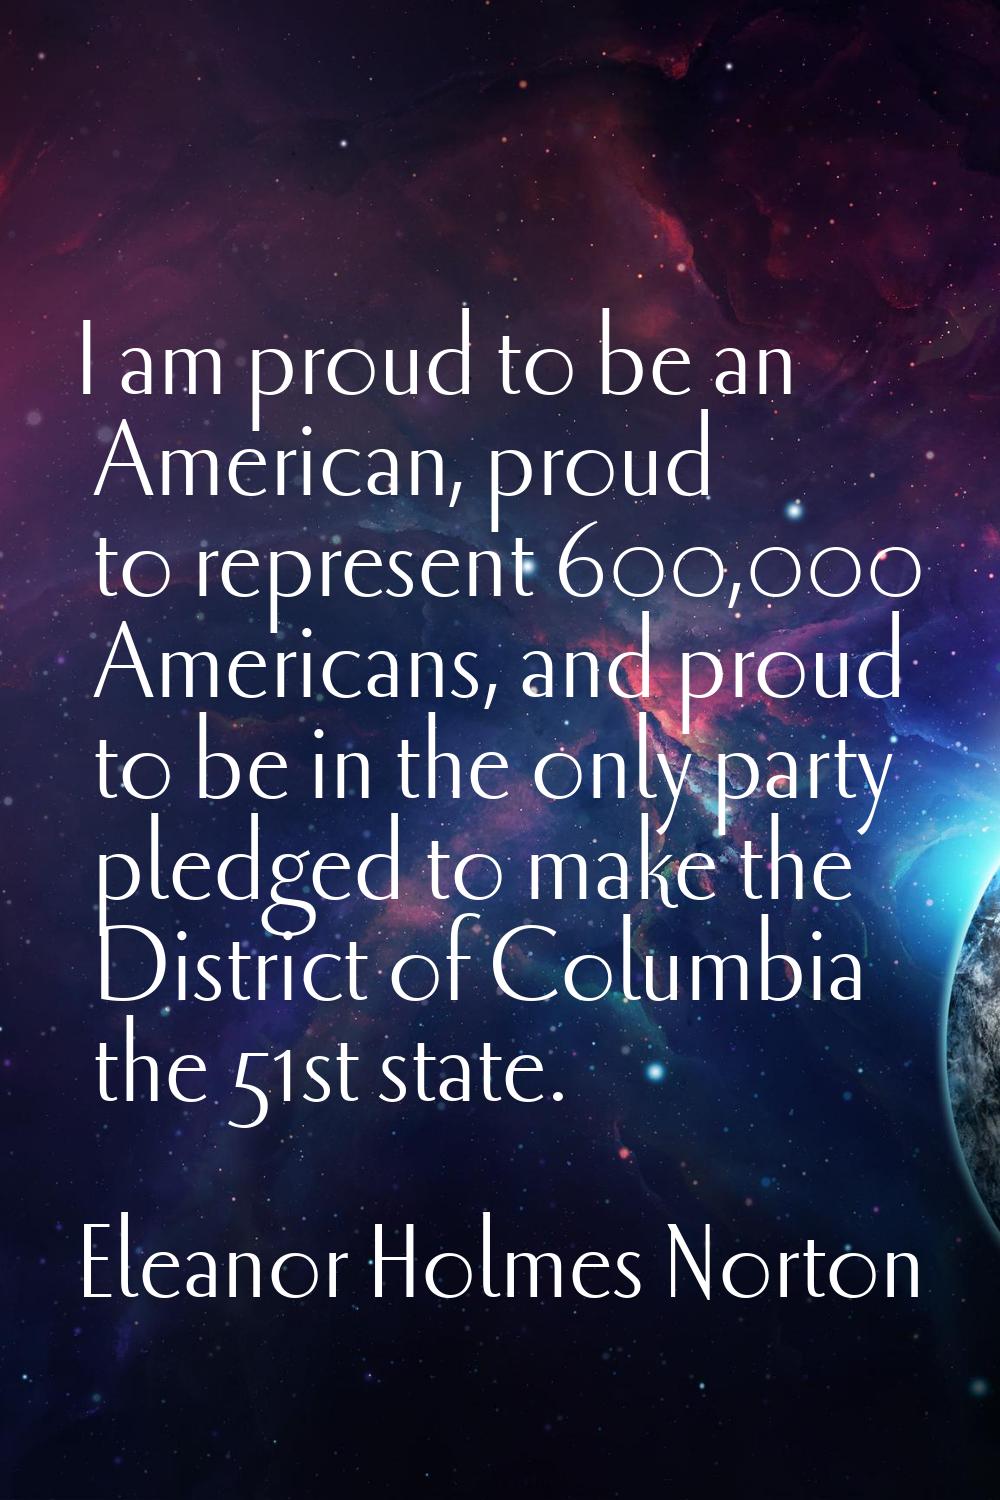 I am proud to be an American, proud to represent 600,000 Americans, and proud to be in the only par